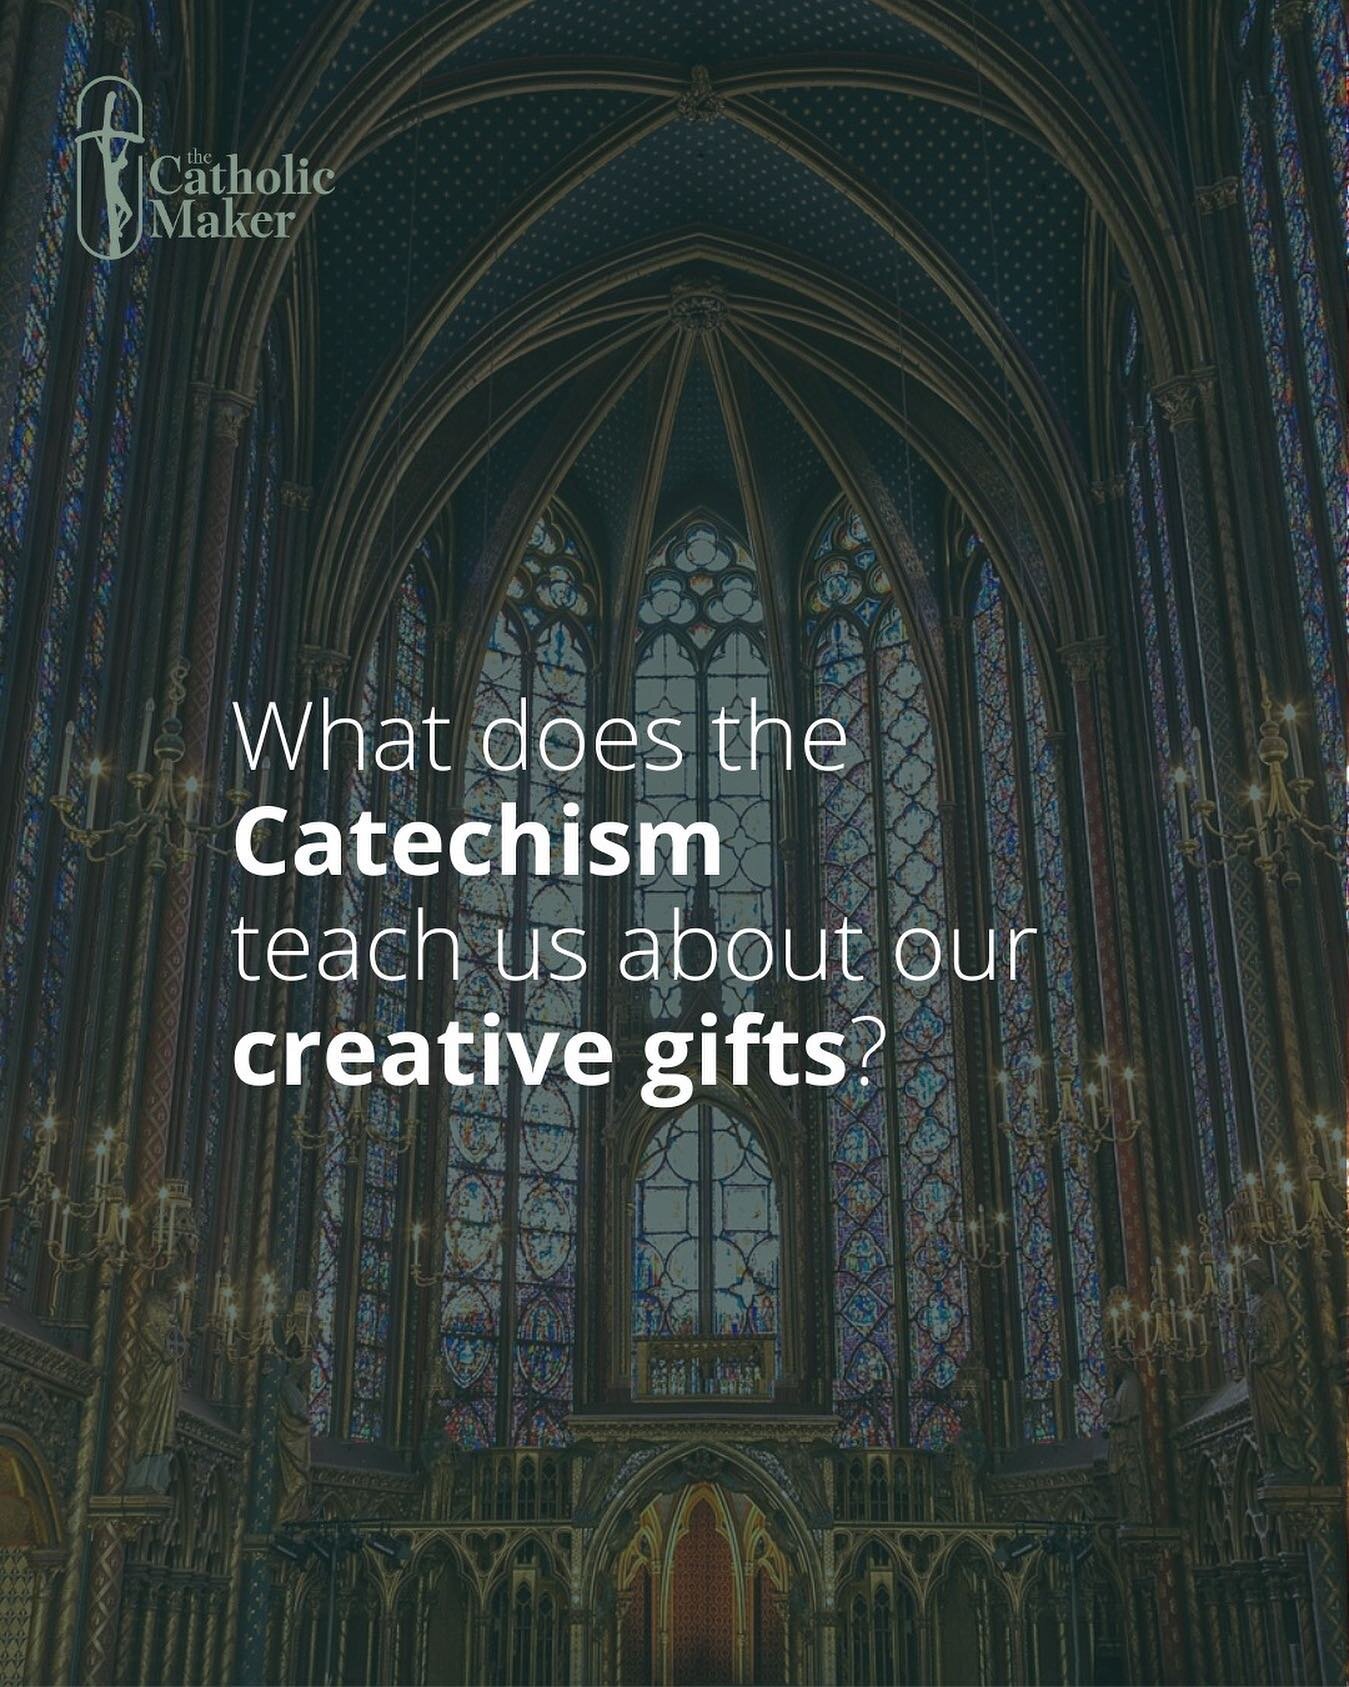 The Catechism of the Catholic Church teaches that every person is created in the image and likeness of God and therefore, each person has unique talents, abilities and gifts. The Church considers that these talents and gifts, also known as &quot;crea